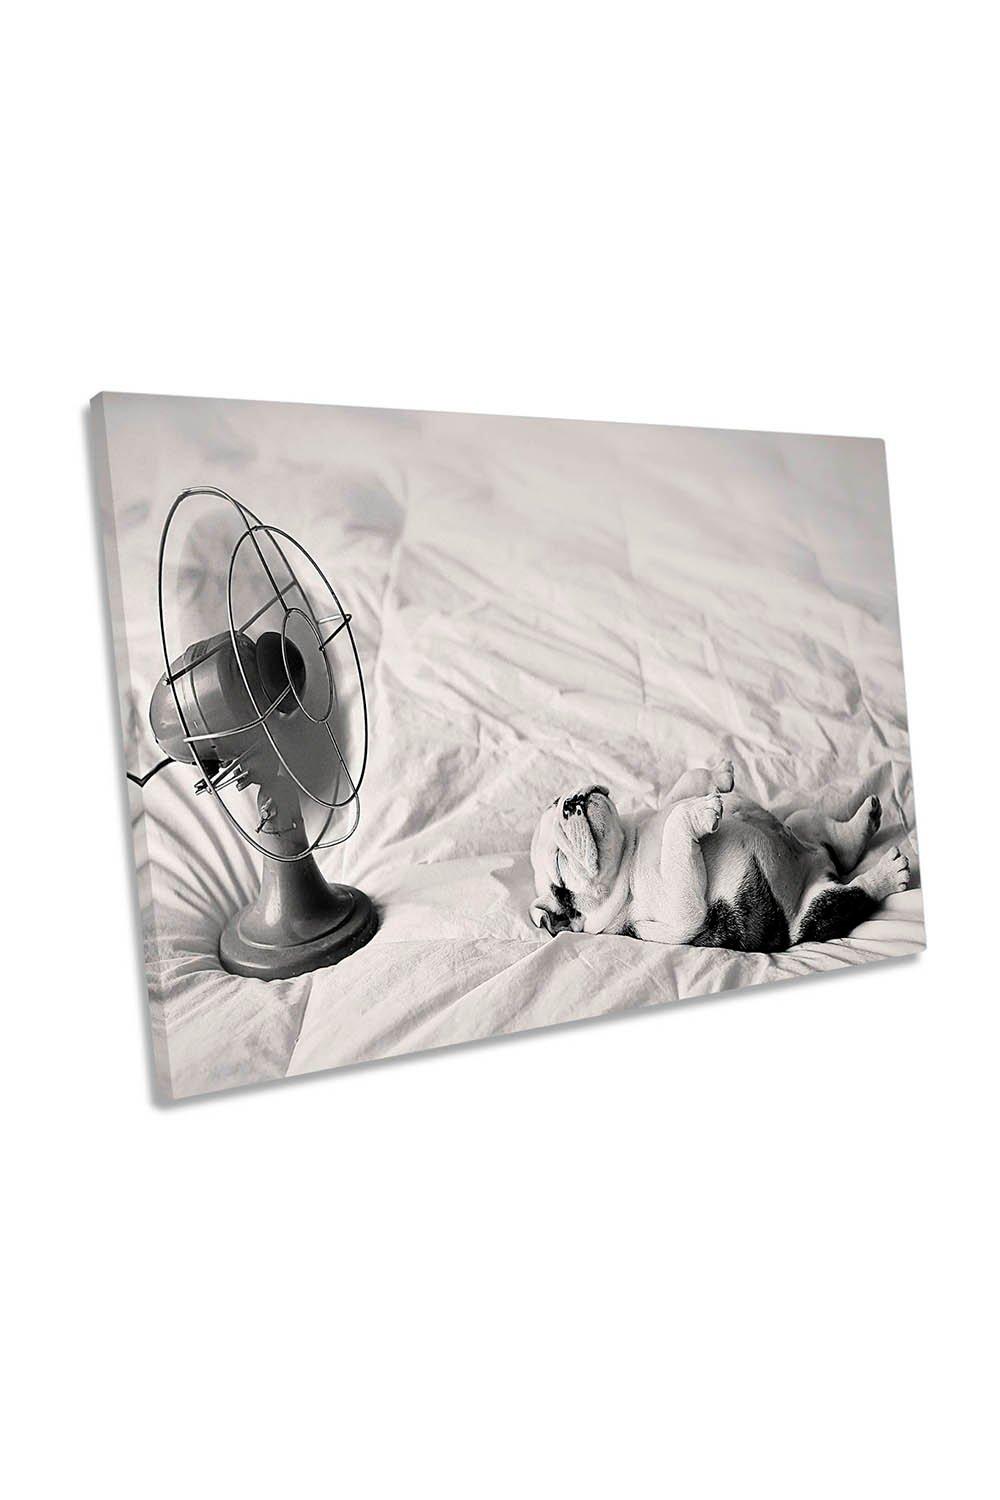 Summer Afternoon Funny Bulldog Fan Dog Puppy Canvas Wall Art Picture Print